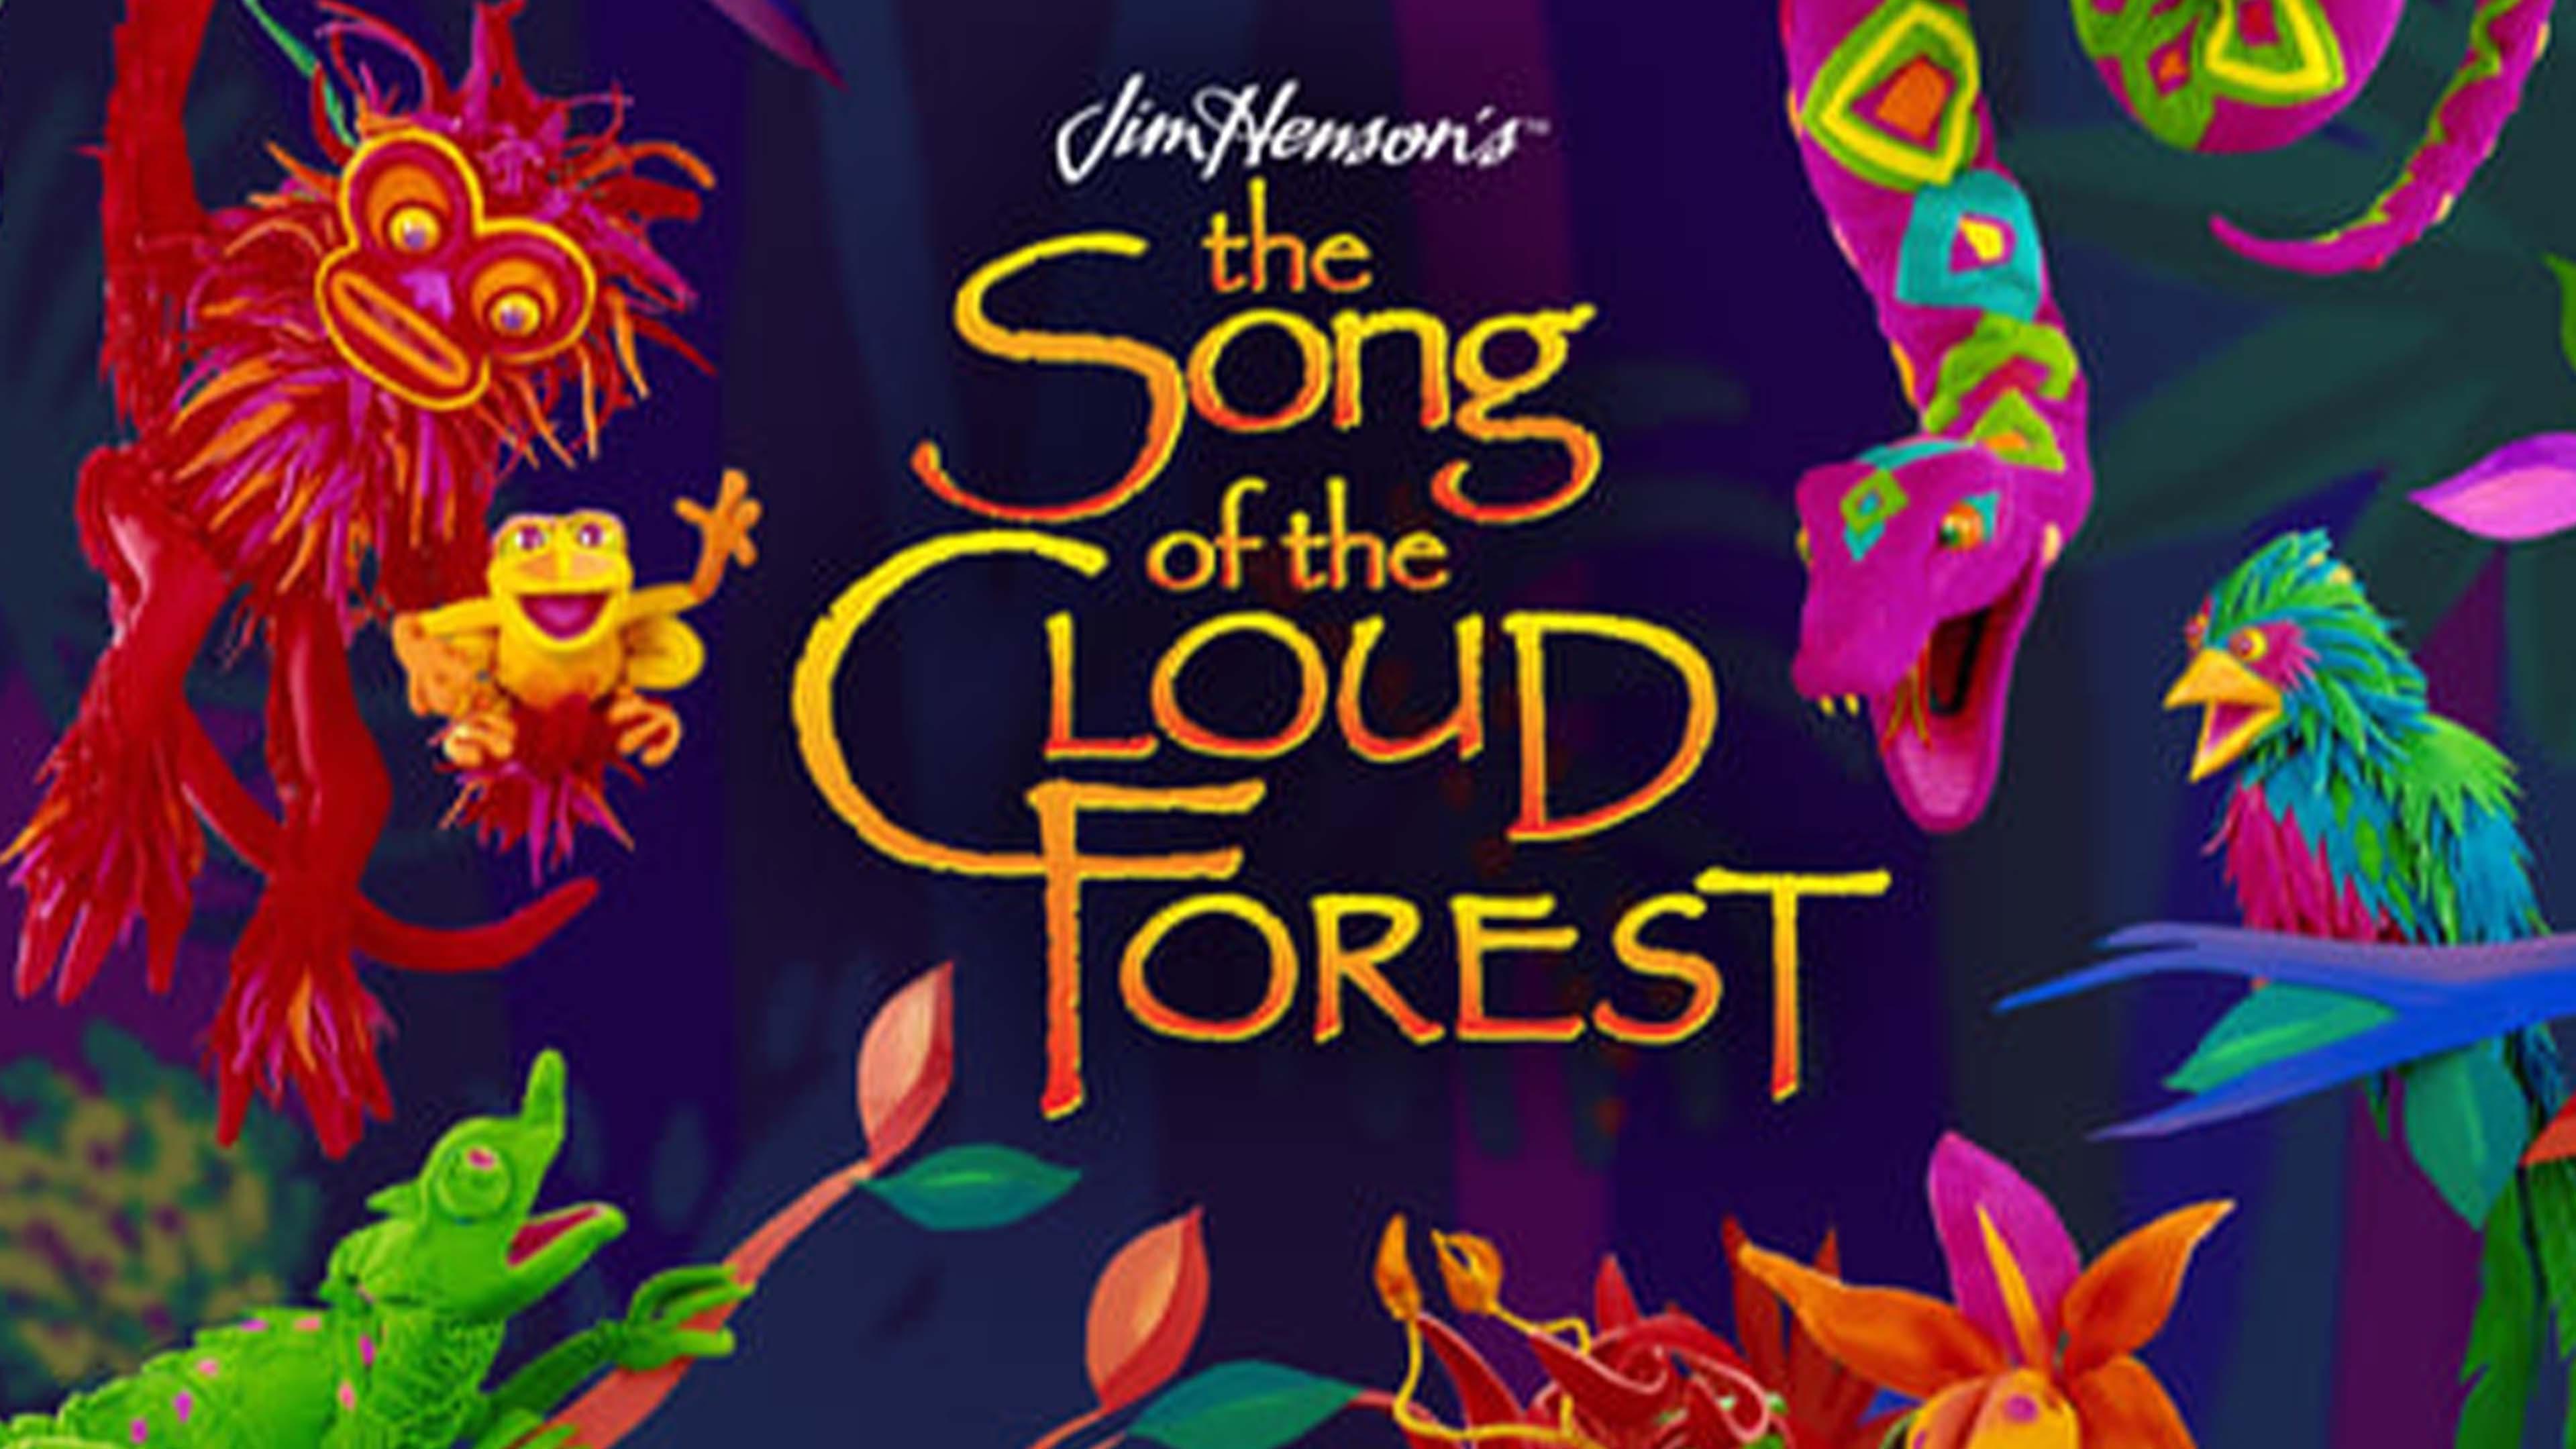 The Song of the Cloud Forest backdrop